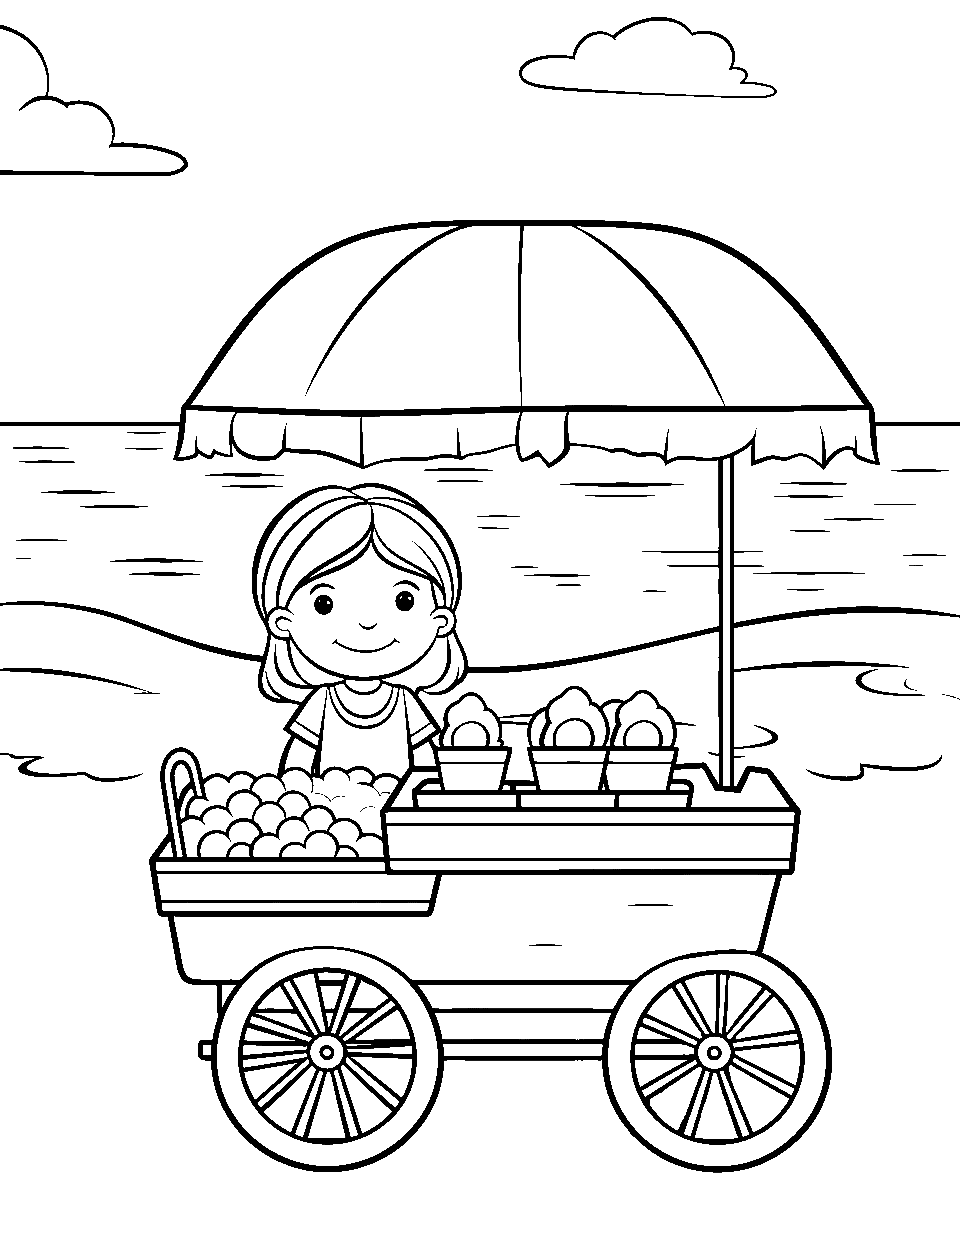 Ice Cream Cart Coloring Page - A small ice cream cart with a cheerful vendor, with the sea behind them.